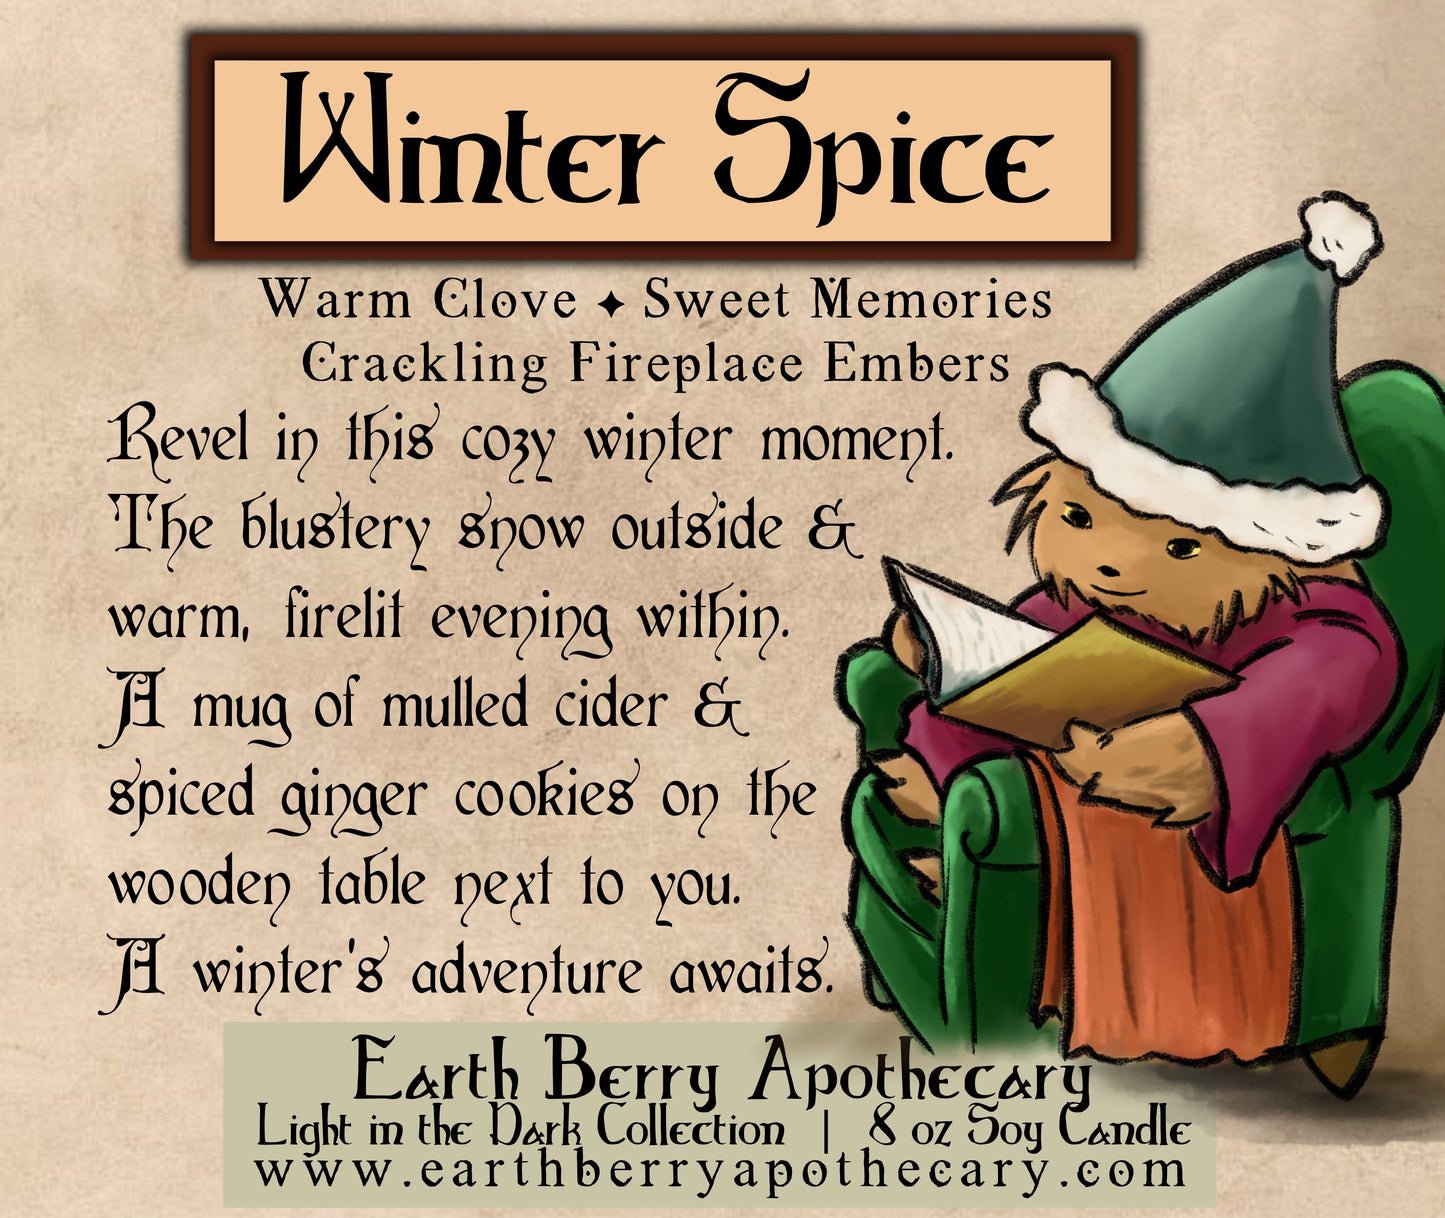 Winter spice warm clove scented soy candle. Always clean burning and nontoxic.